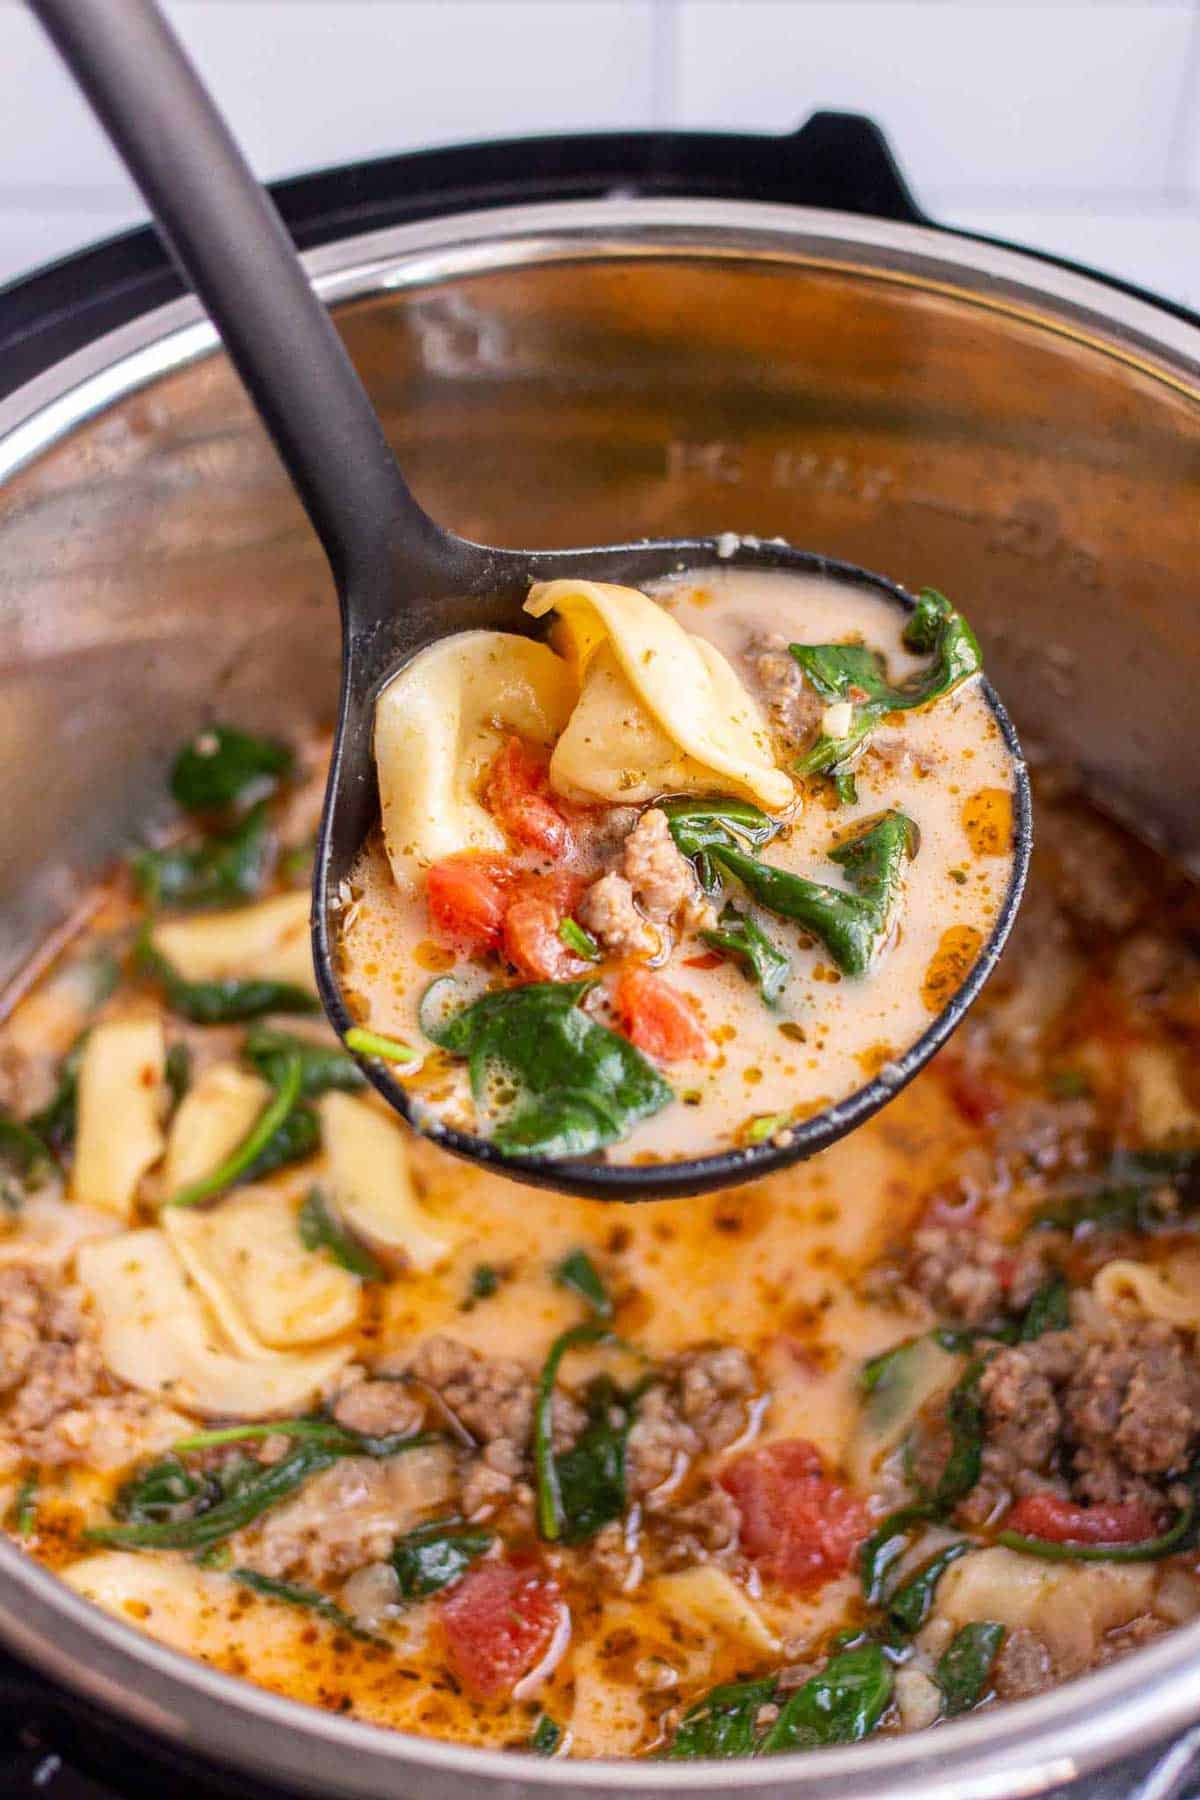 Instant Pot Tortellini Soup with tortellini, Italian sausage, and wilted baby spinach in a ladle above the Instant Pot.